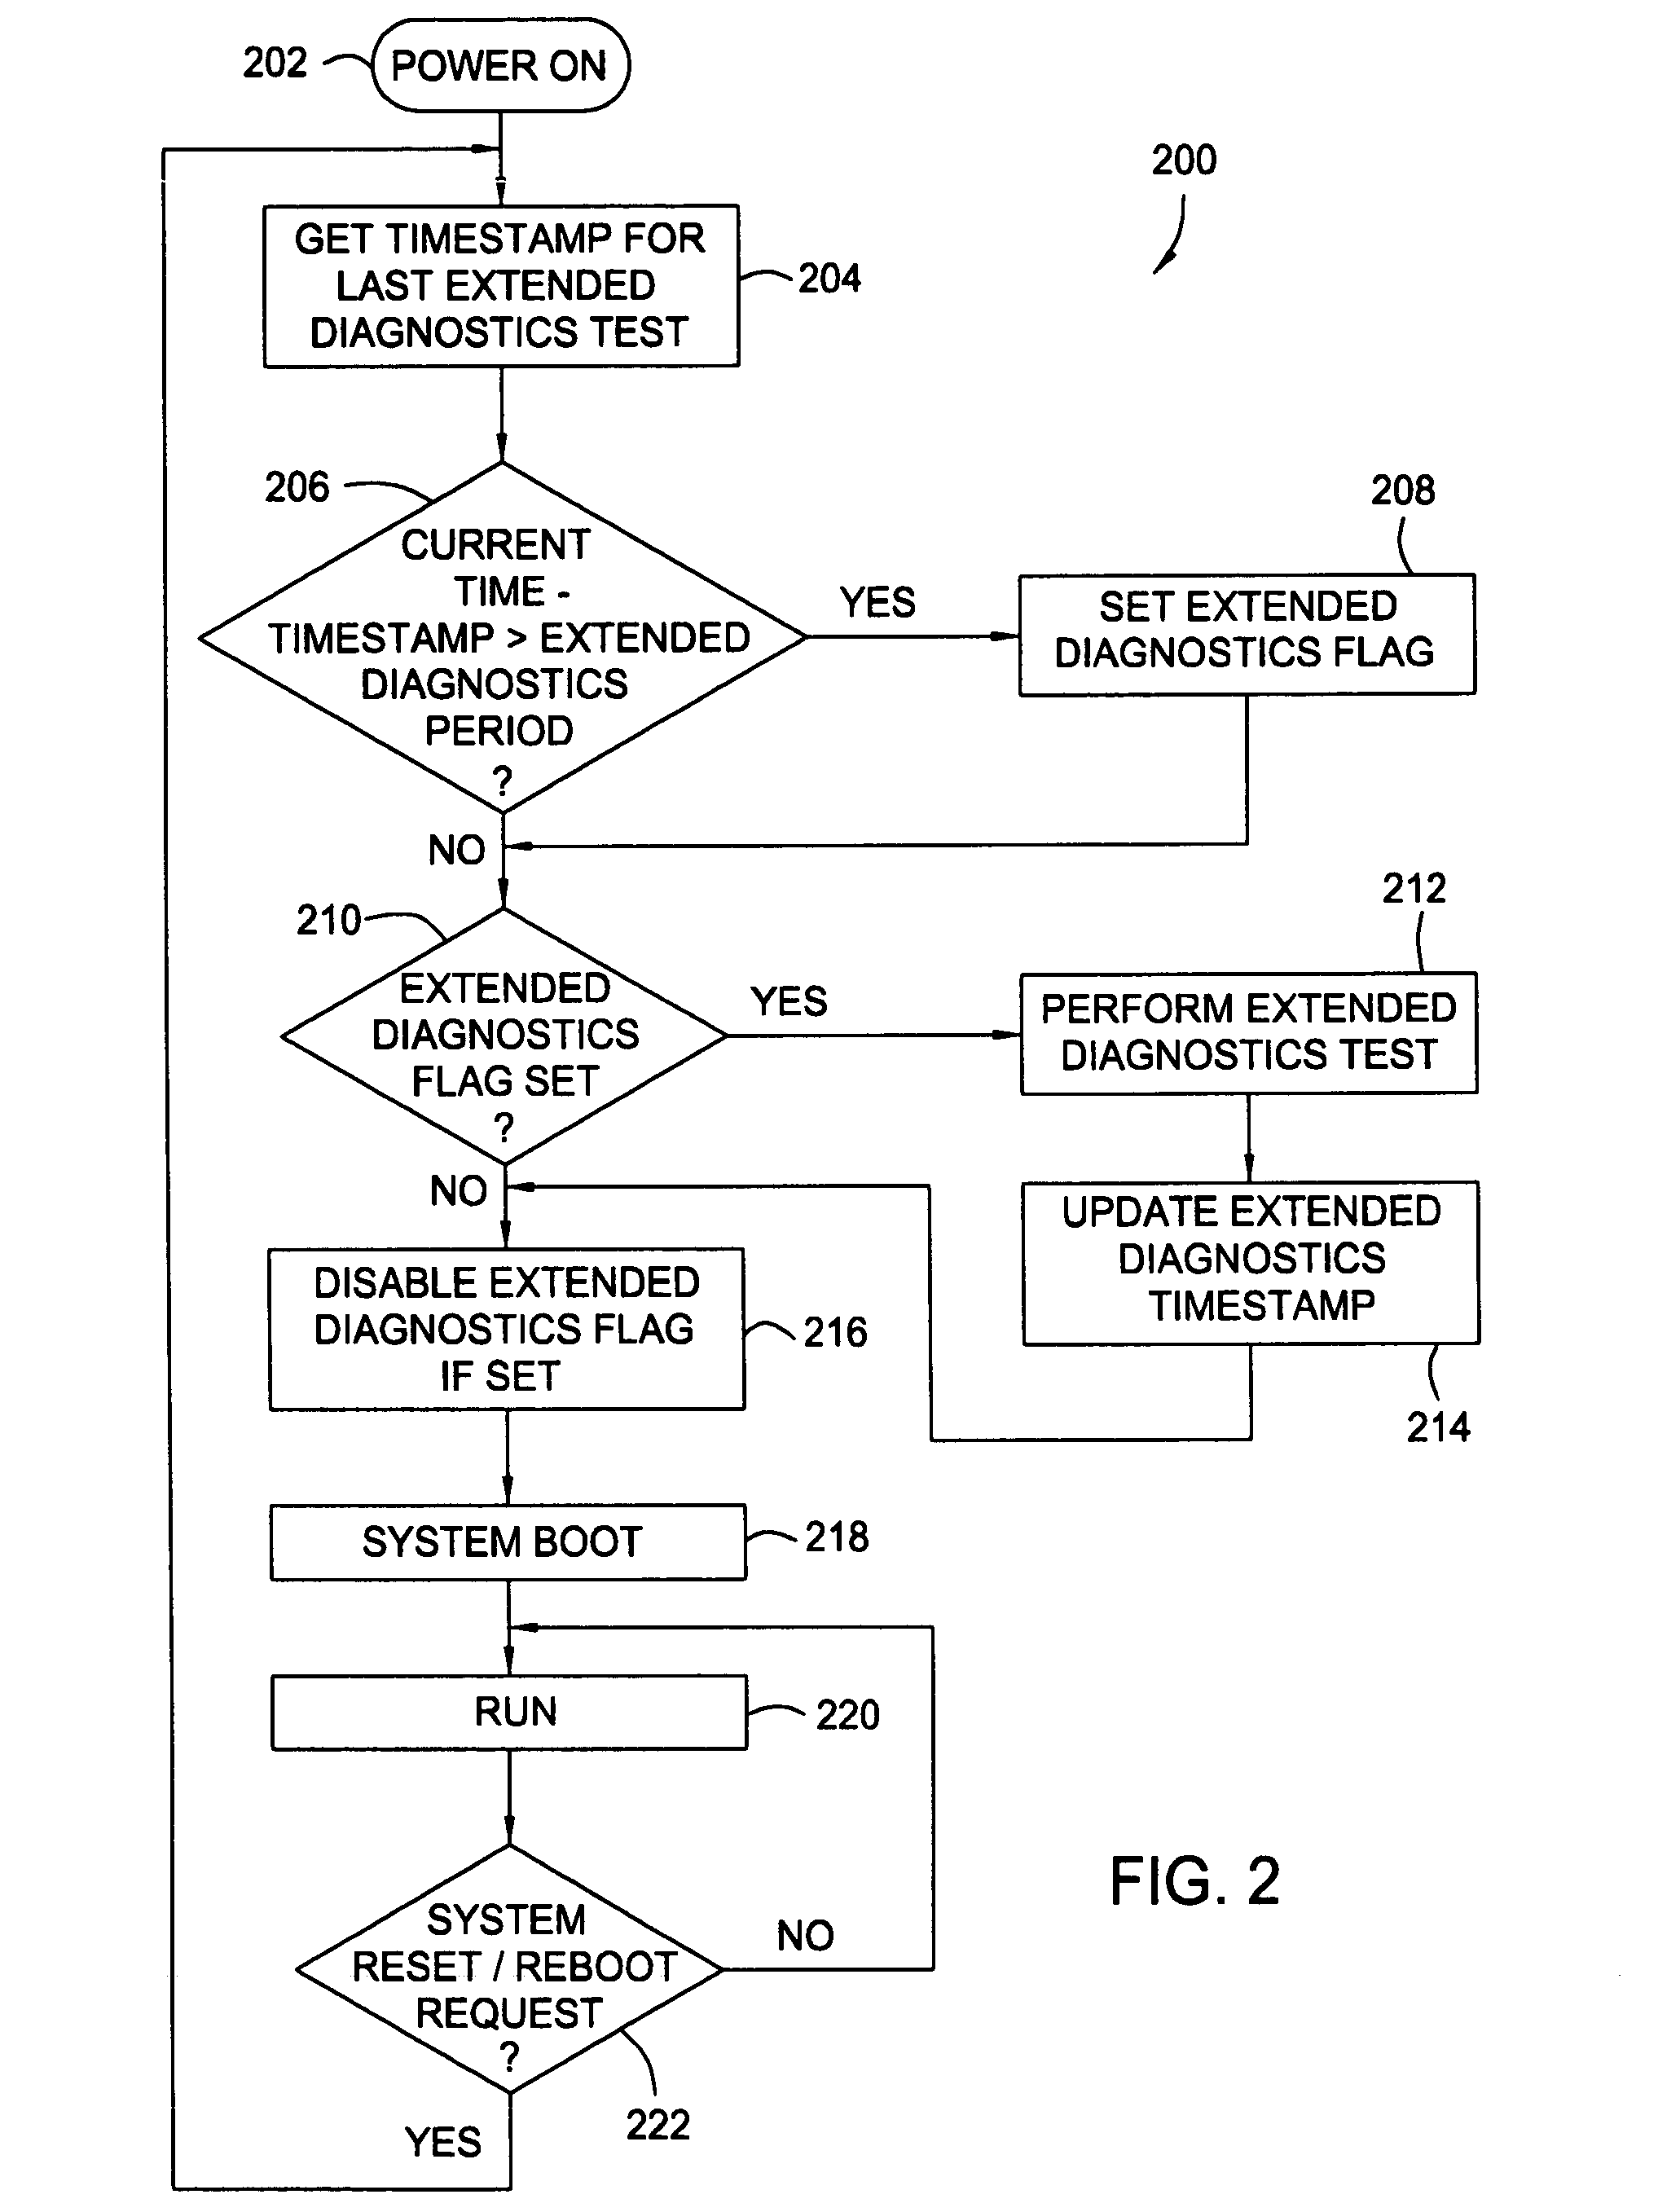 Dynamic scheduling of diagnostic tests to be performed during a system boot process